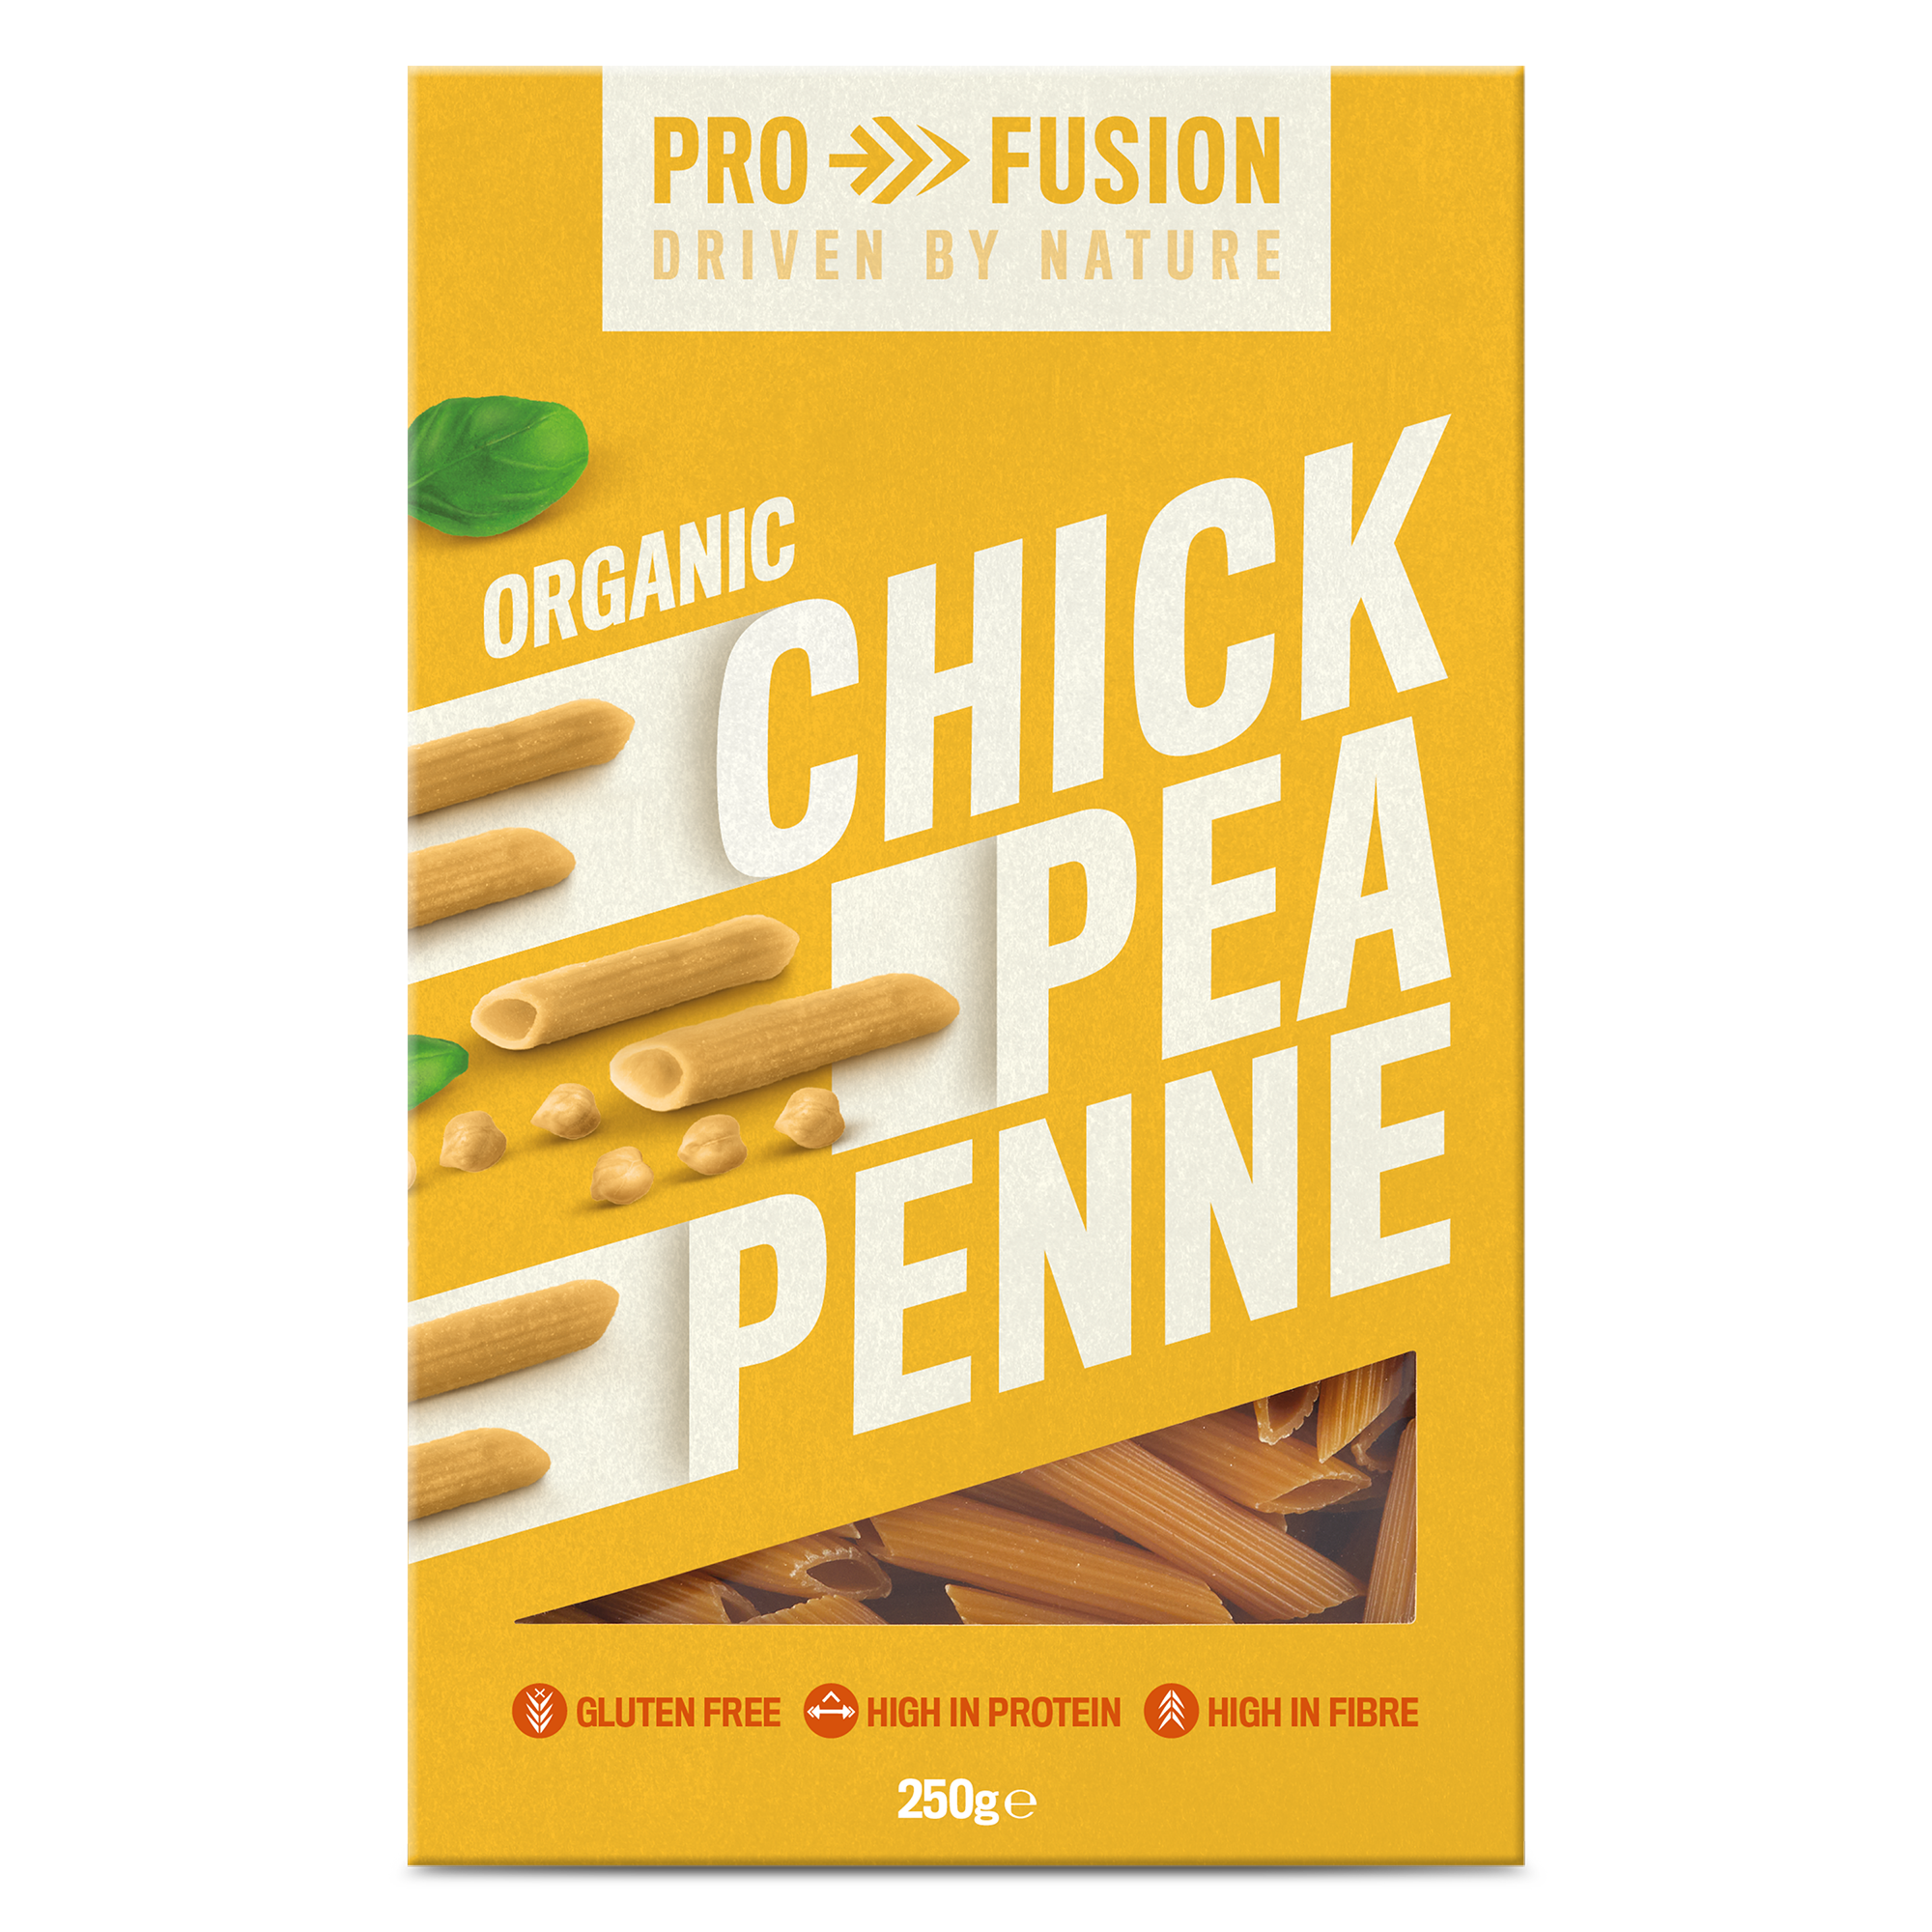 CHICKPEA PENNE